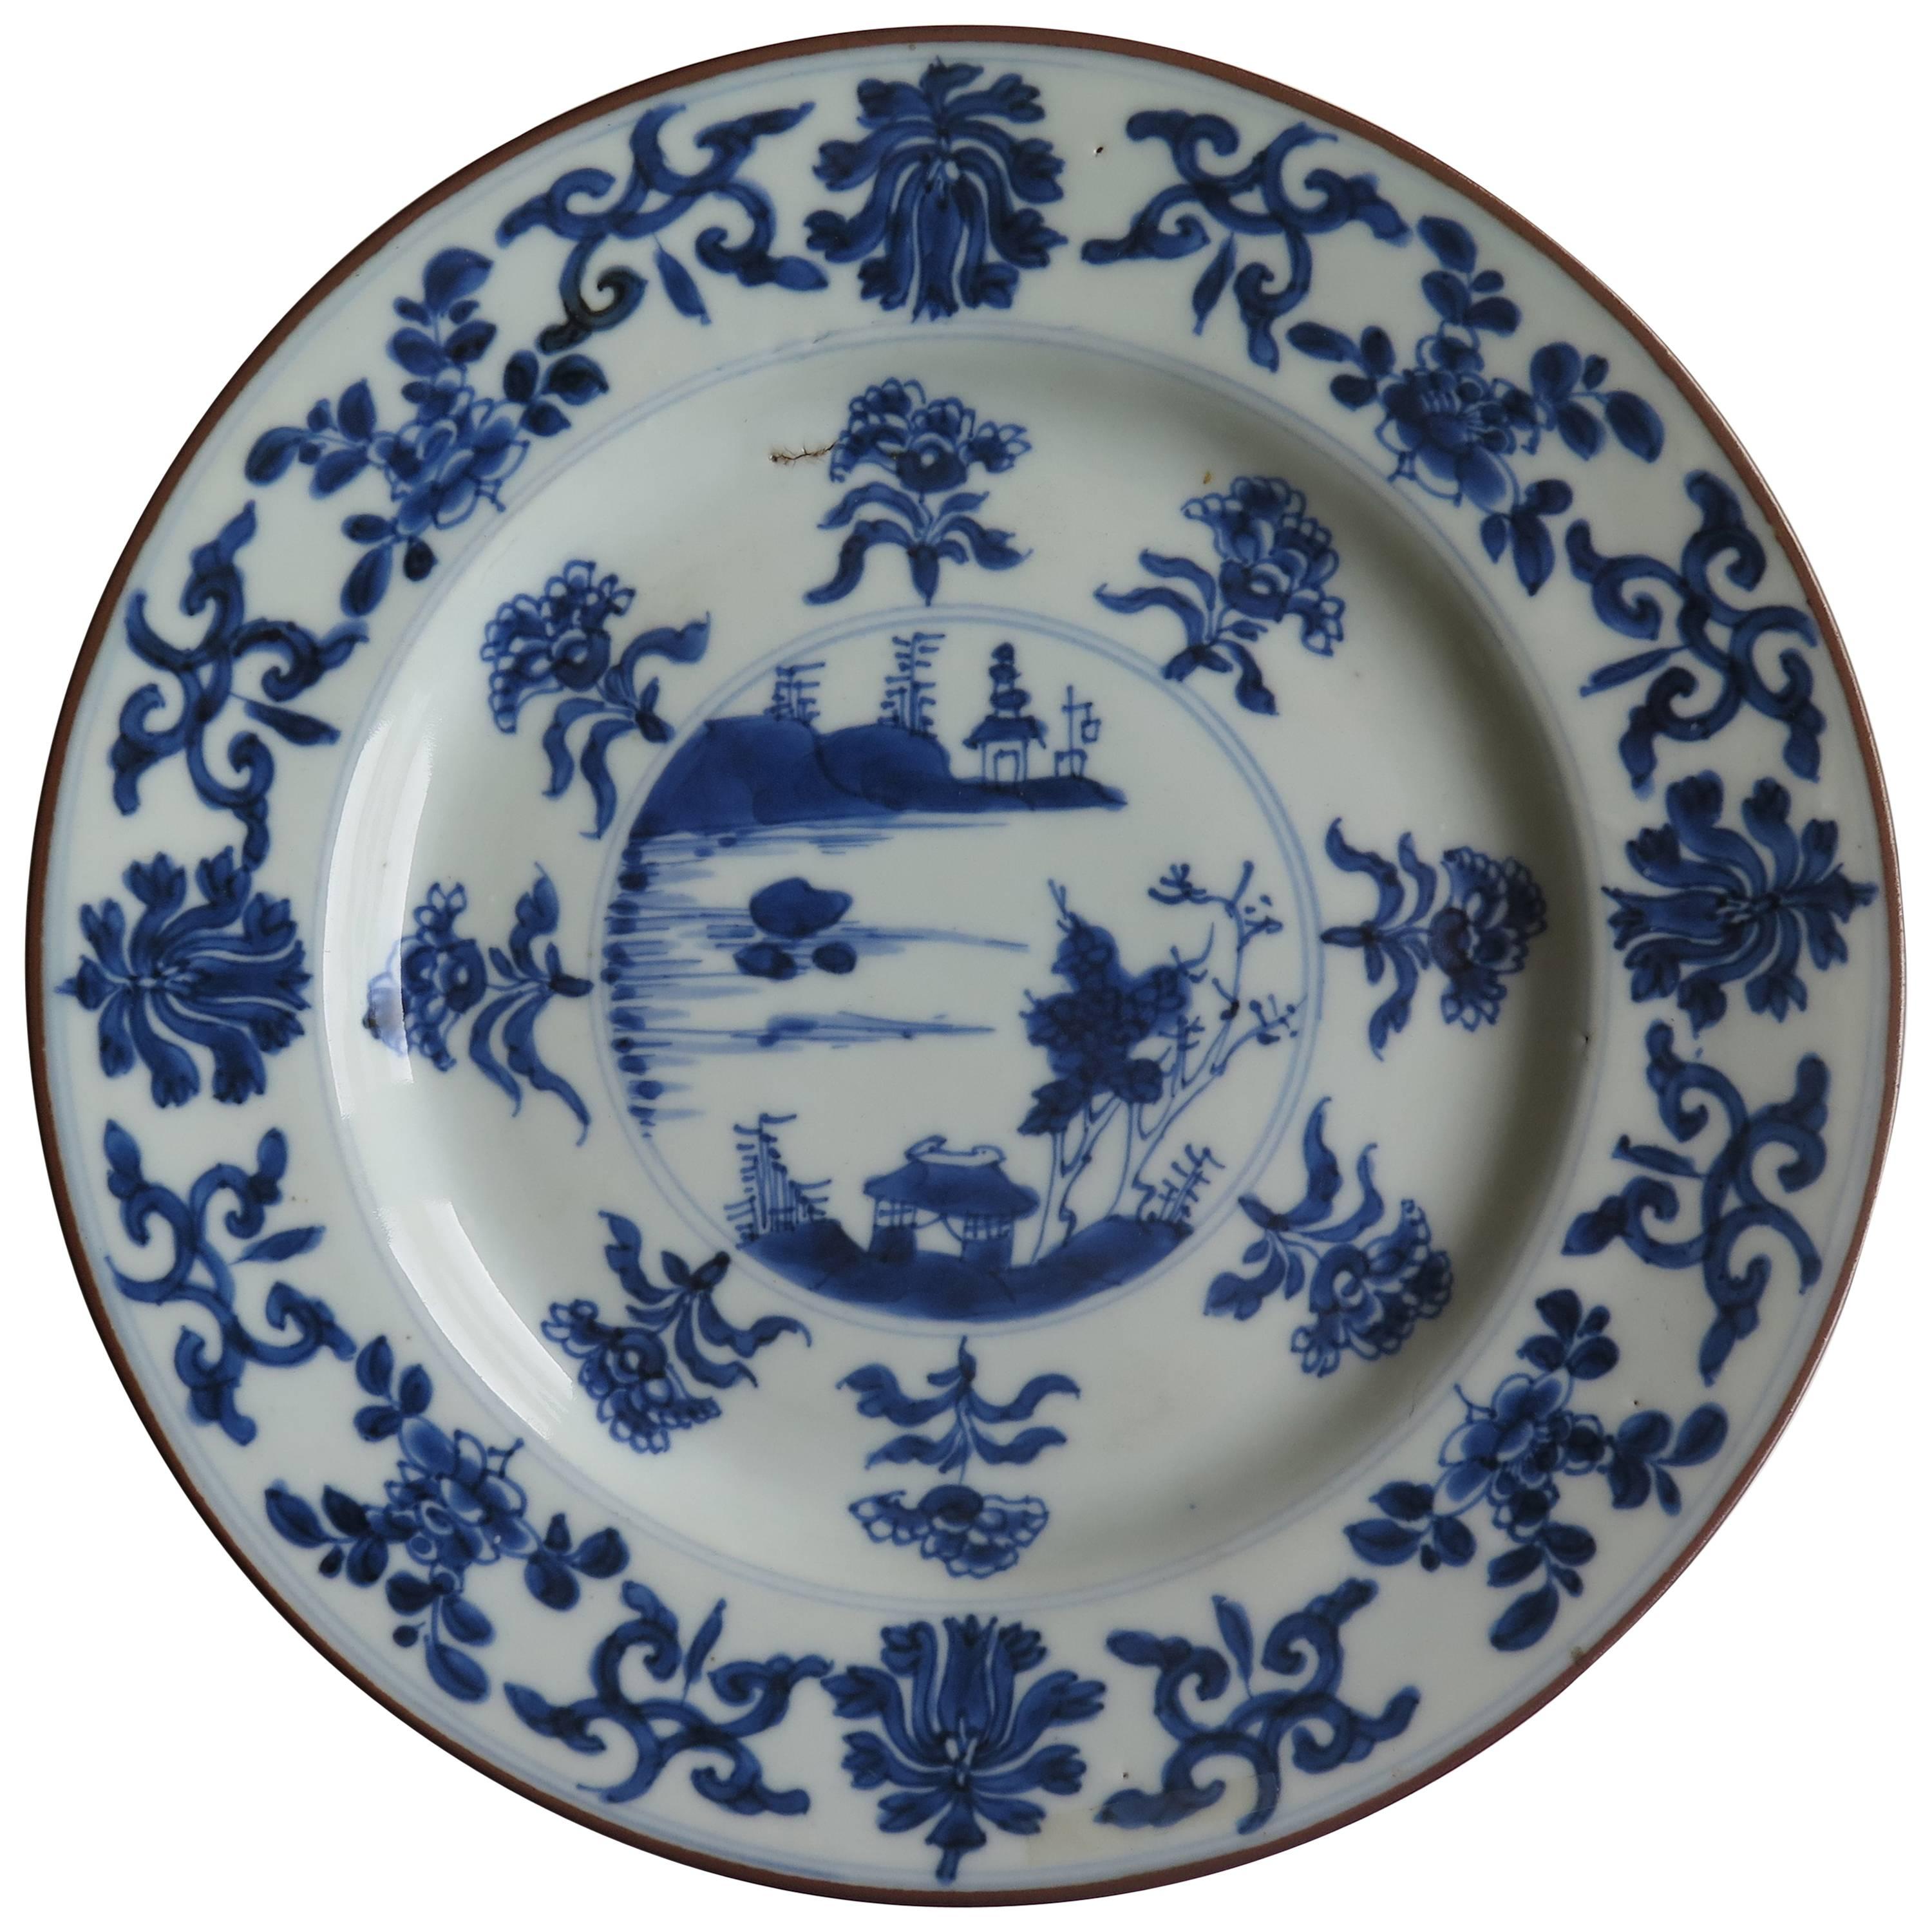 Qing, "Kangxi" Period, Chinese Plate, Blue and White Porcelain, circa 1700